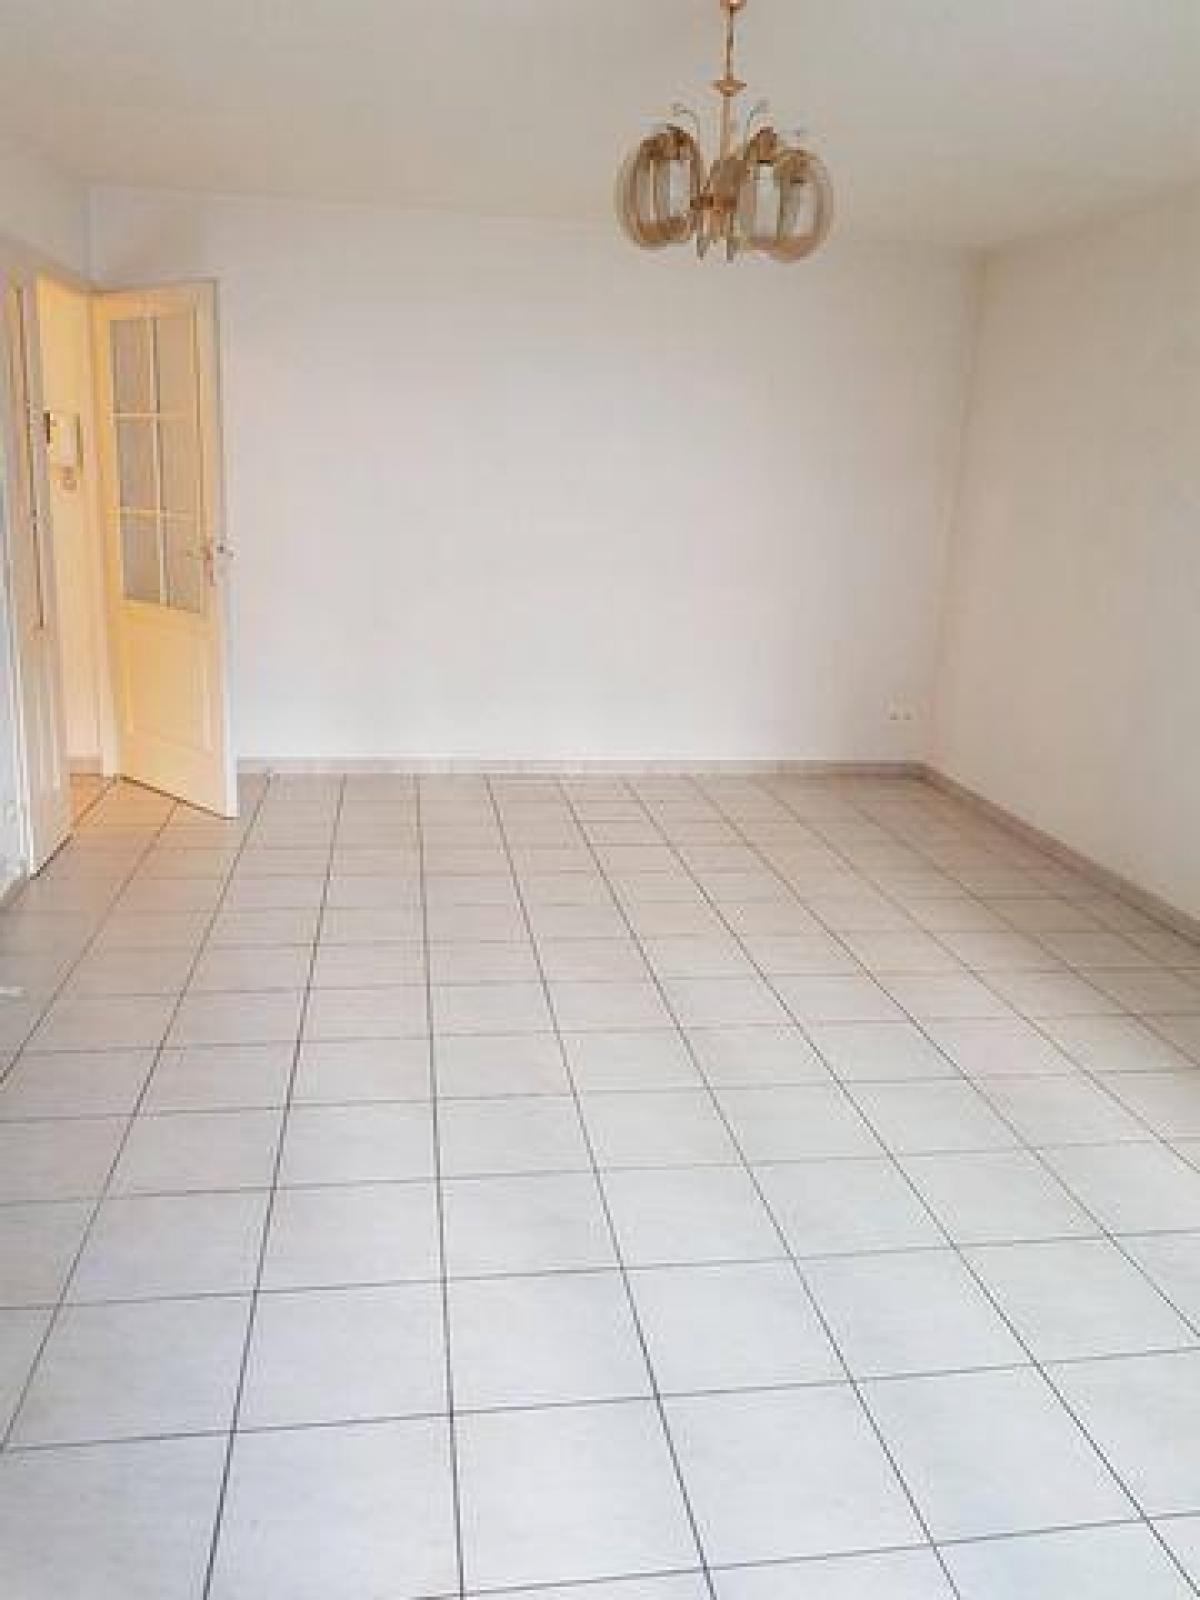 Picture of Condo For Sale in Remiremont, Lorraine, France